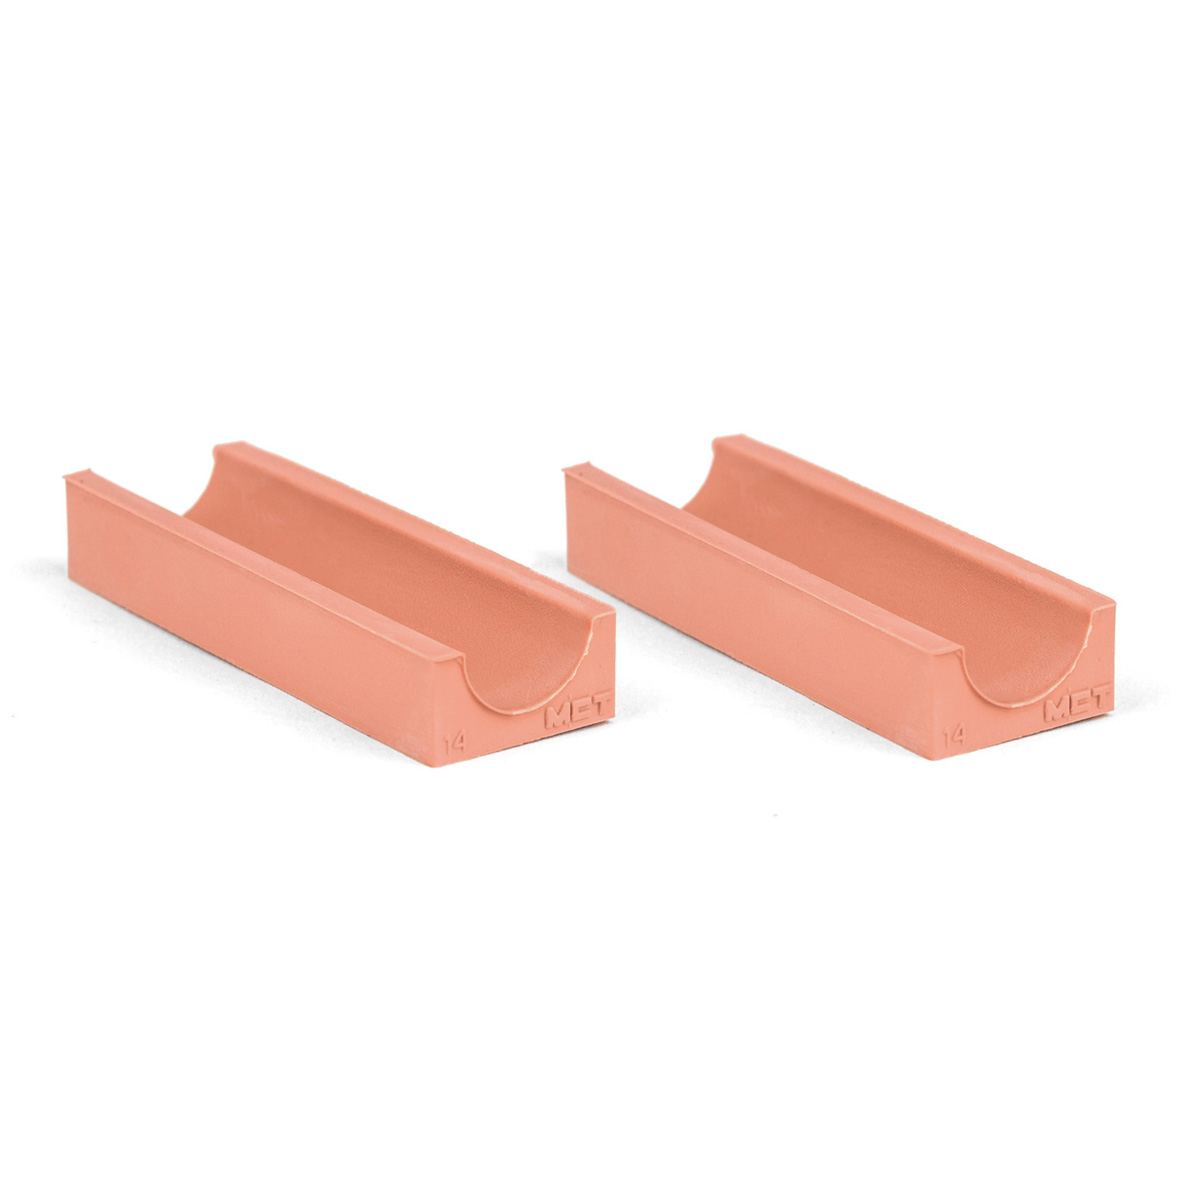 20-14*2 Set of 2 half insert block lycron, 20-14 for cable/pipe diam. 13.5-14.5mm